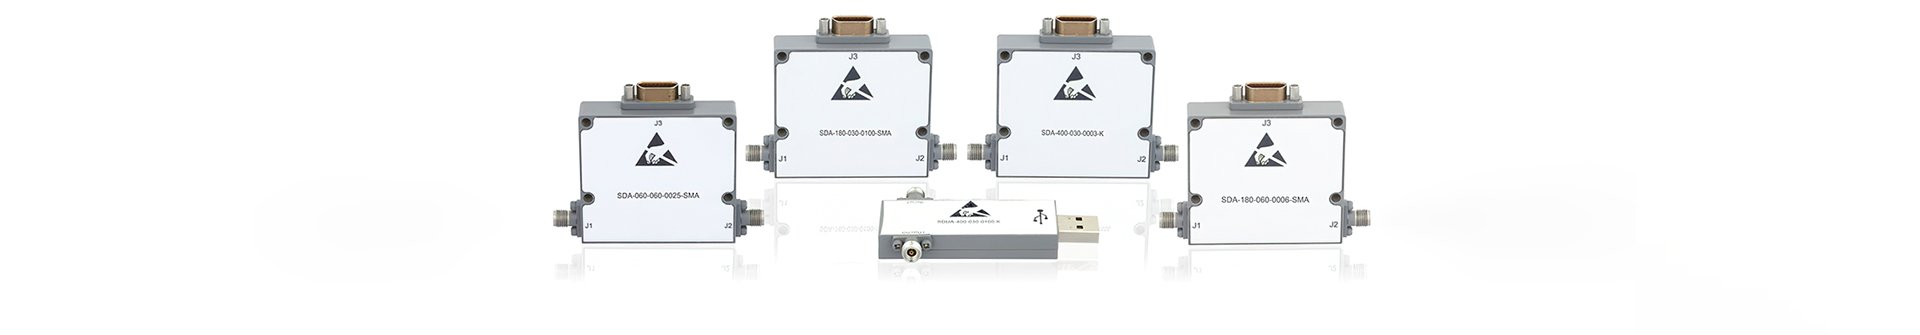 Digitally Controlled Programmable Attenuators from Fairview Microwave